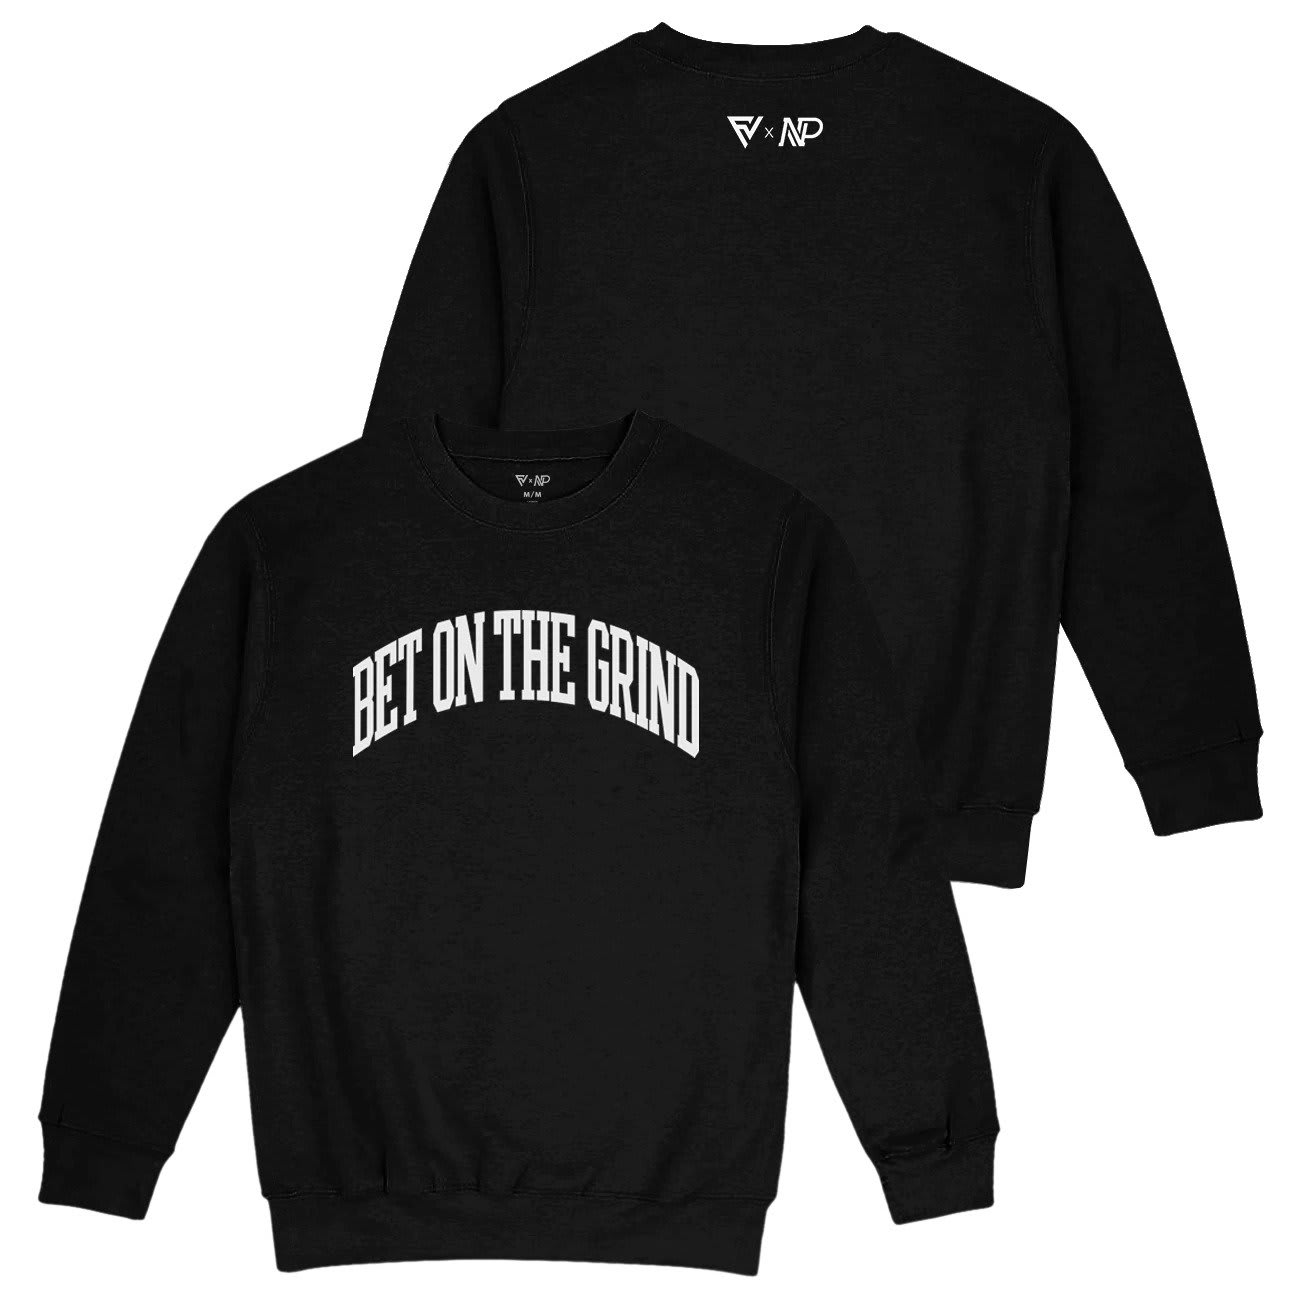 Bet on the Grind sweater